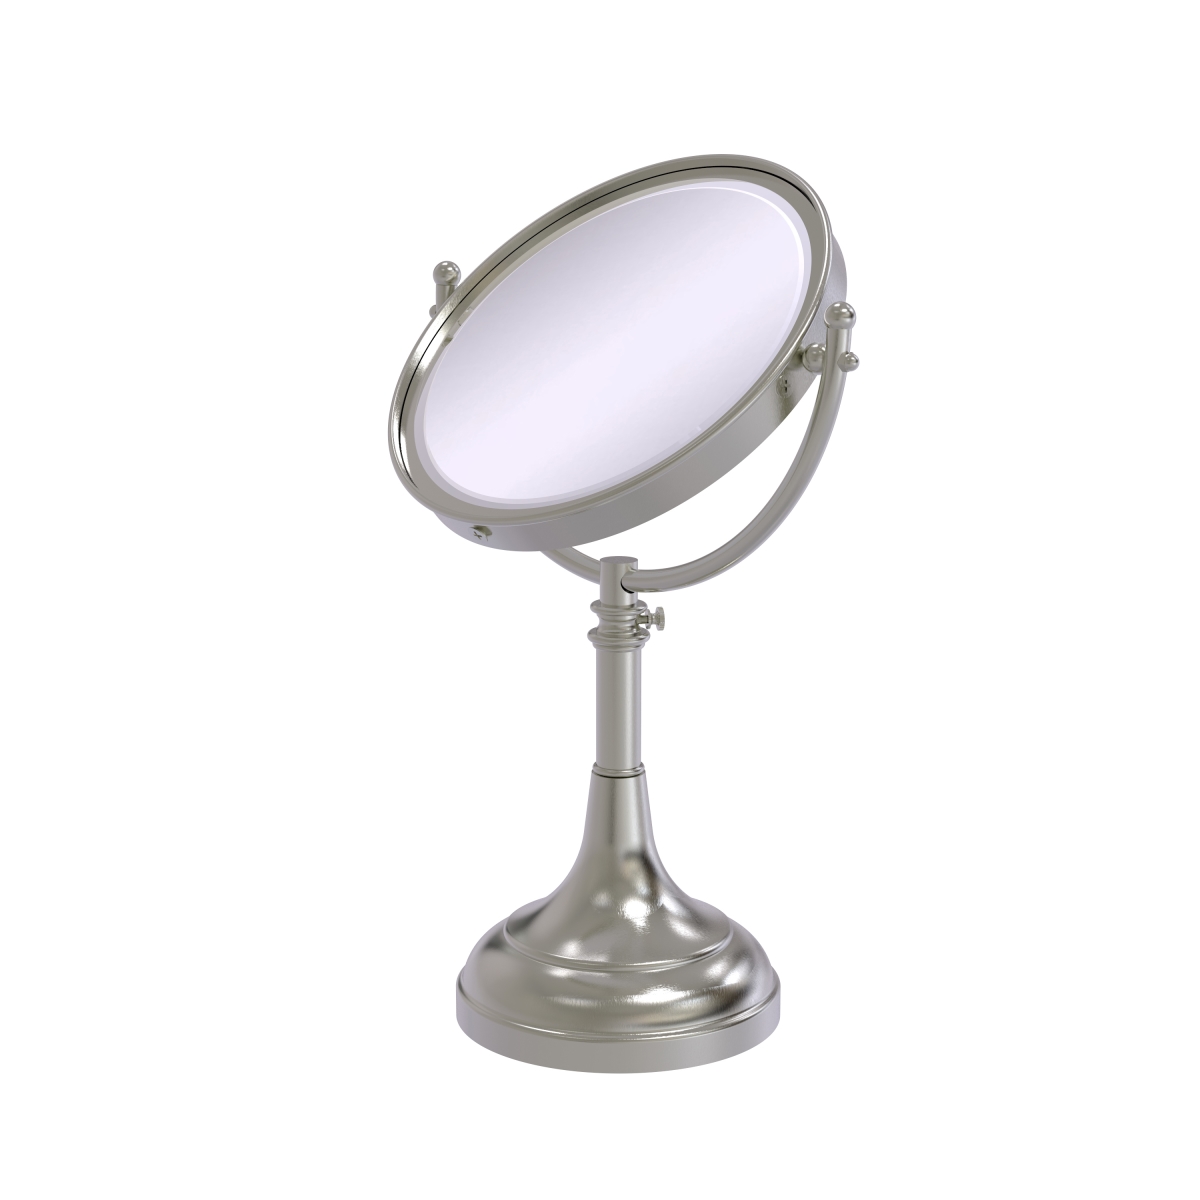 Picture of Allied Brass DM-1-4X-SN 8 in. Height Adjustable Vanity Top Make-Up Mirror 4X Magnification, Satin Nickel